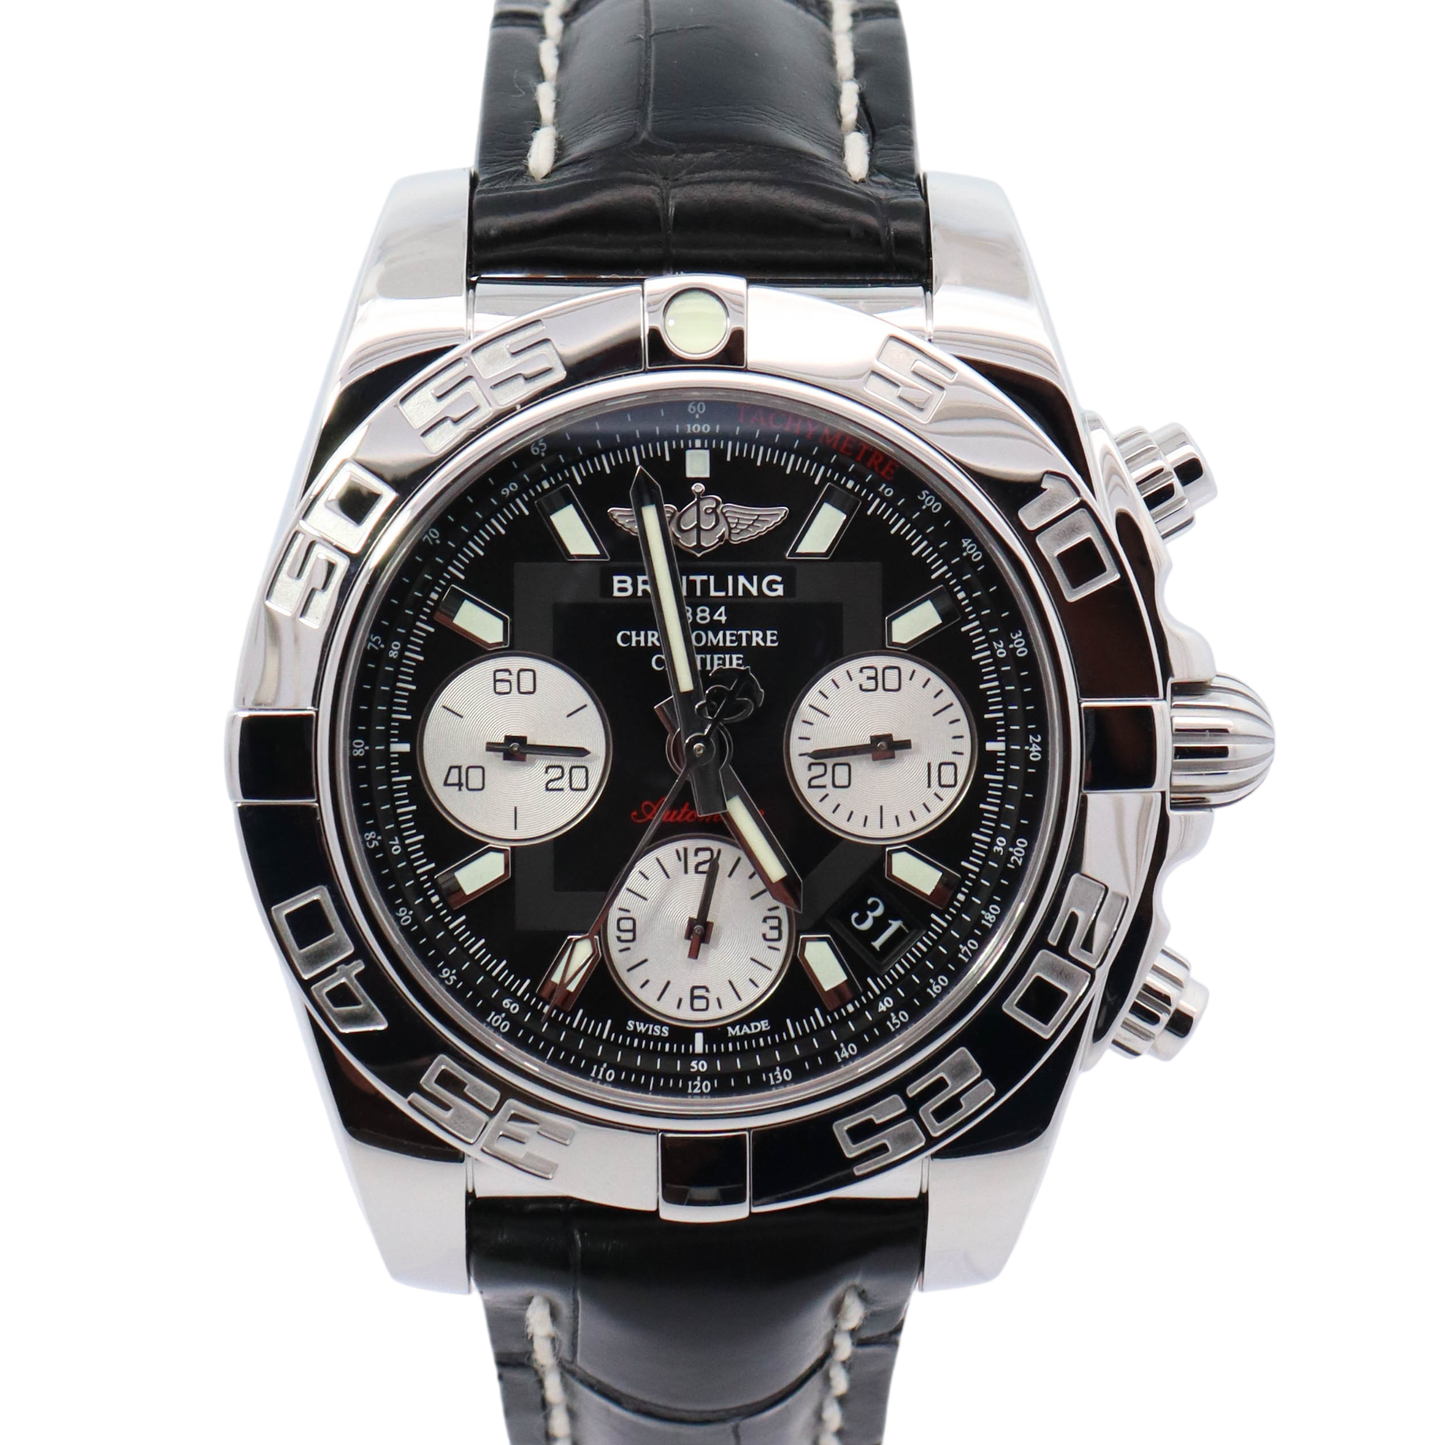 Breitling Chronomat 41mm Stainless Steel Black Chronograph Dial Watch Reference# AB0140